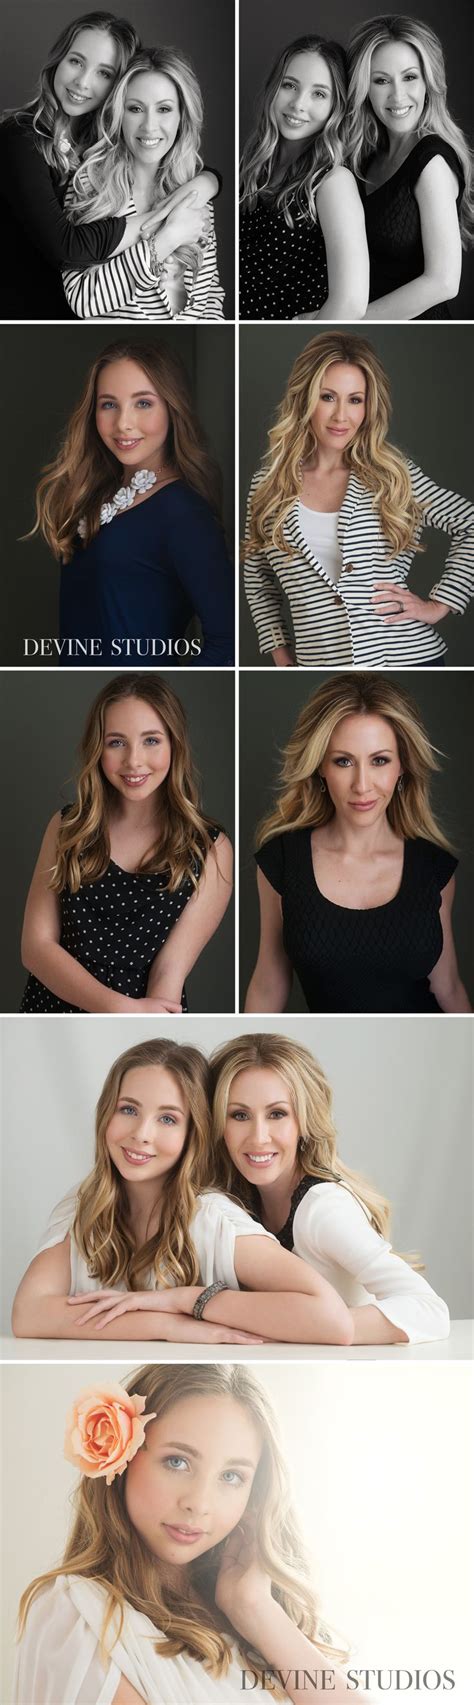 63 Best Images About Headshot Pose And Make Up Ideas On